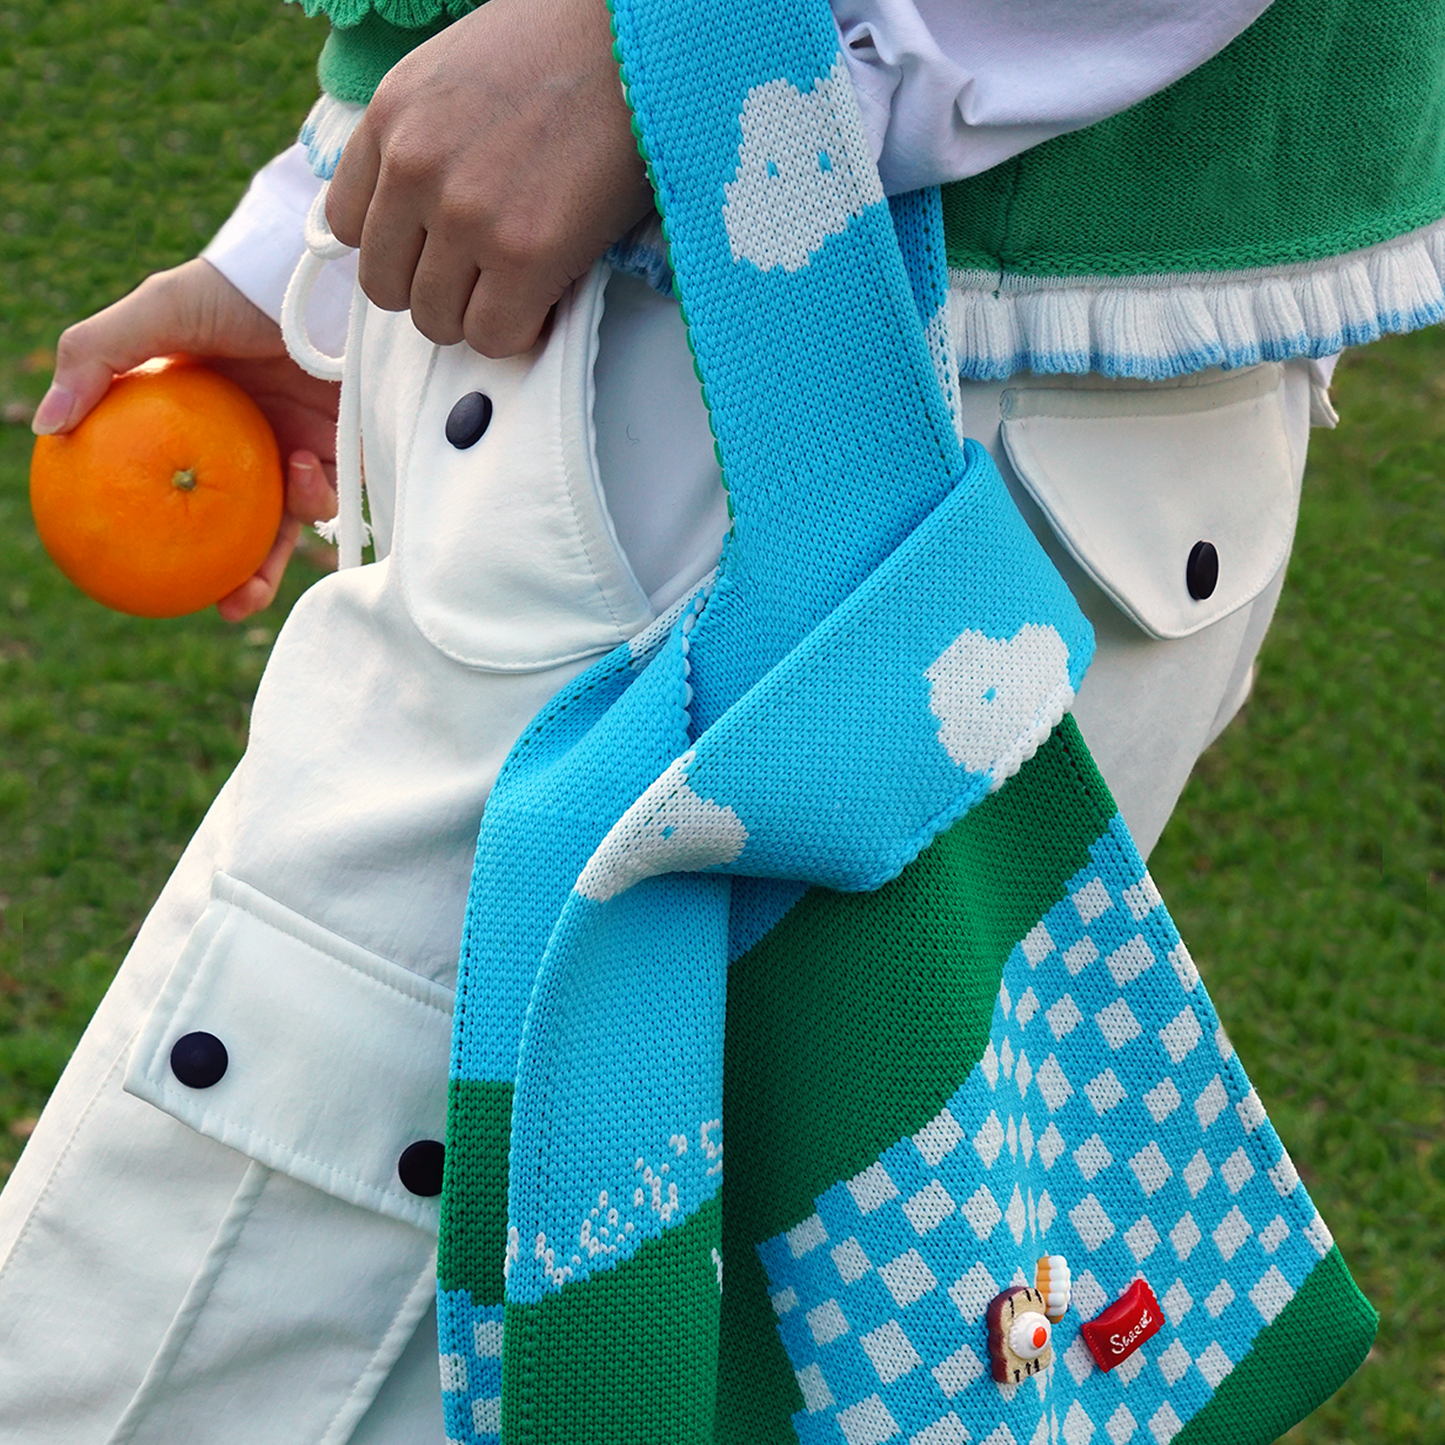 “Let's Picnic” Knitted Bag